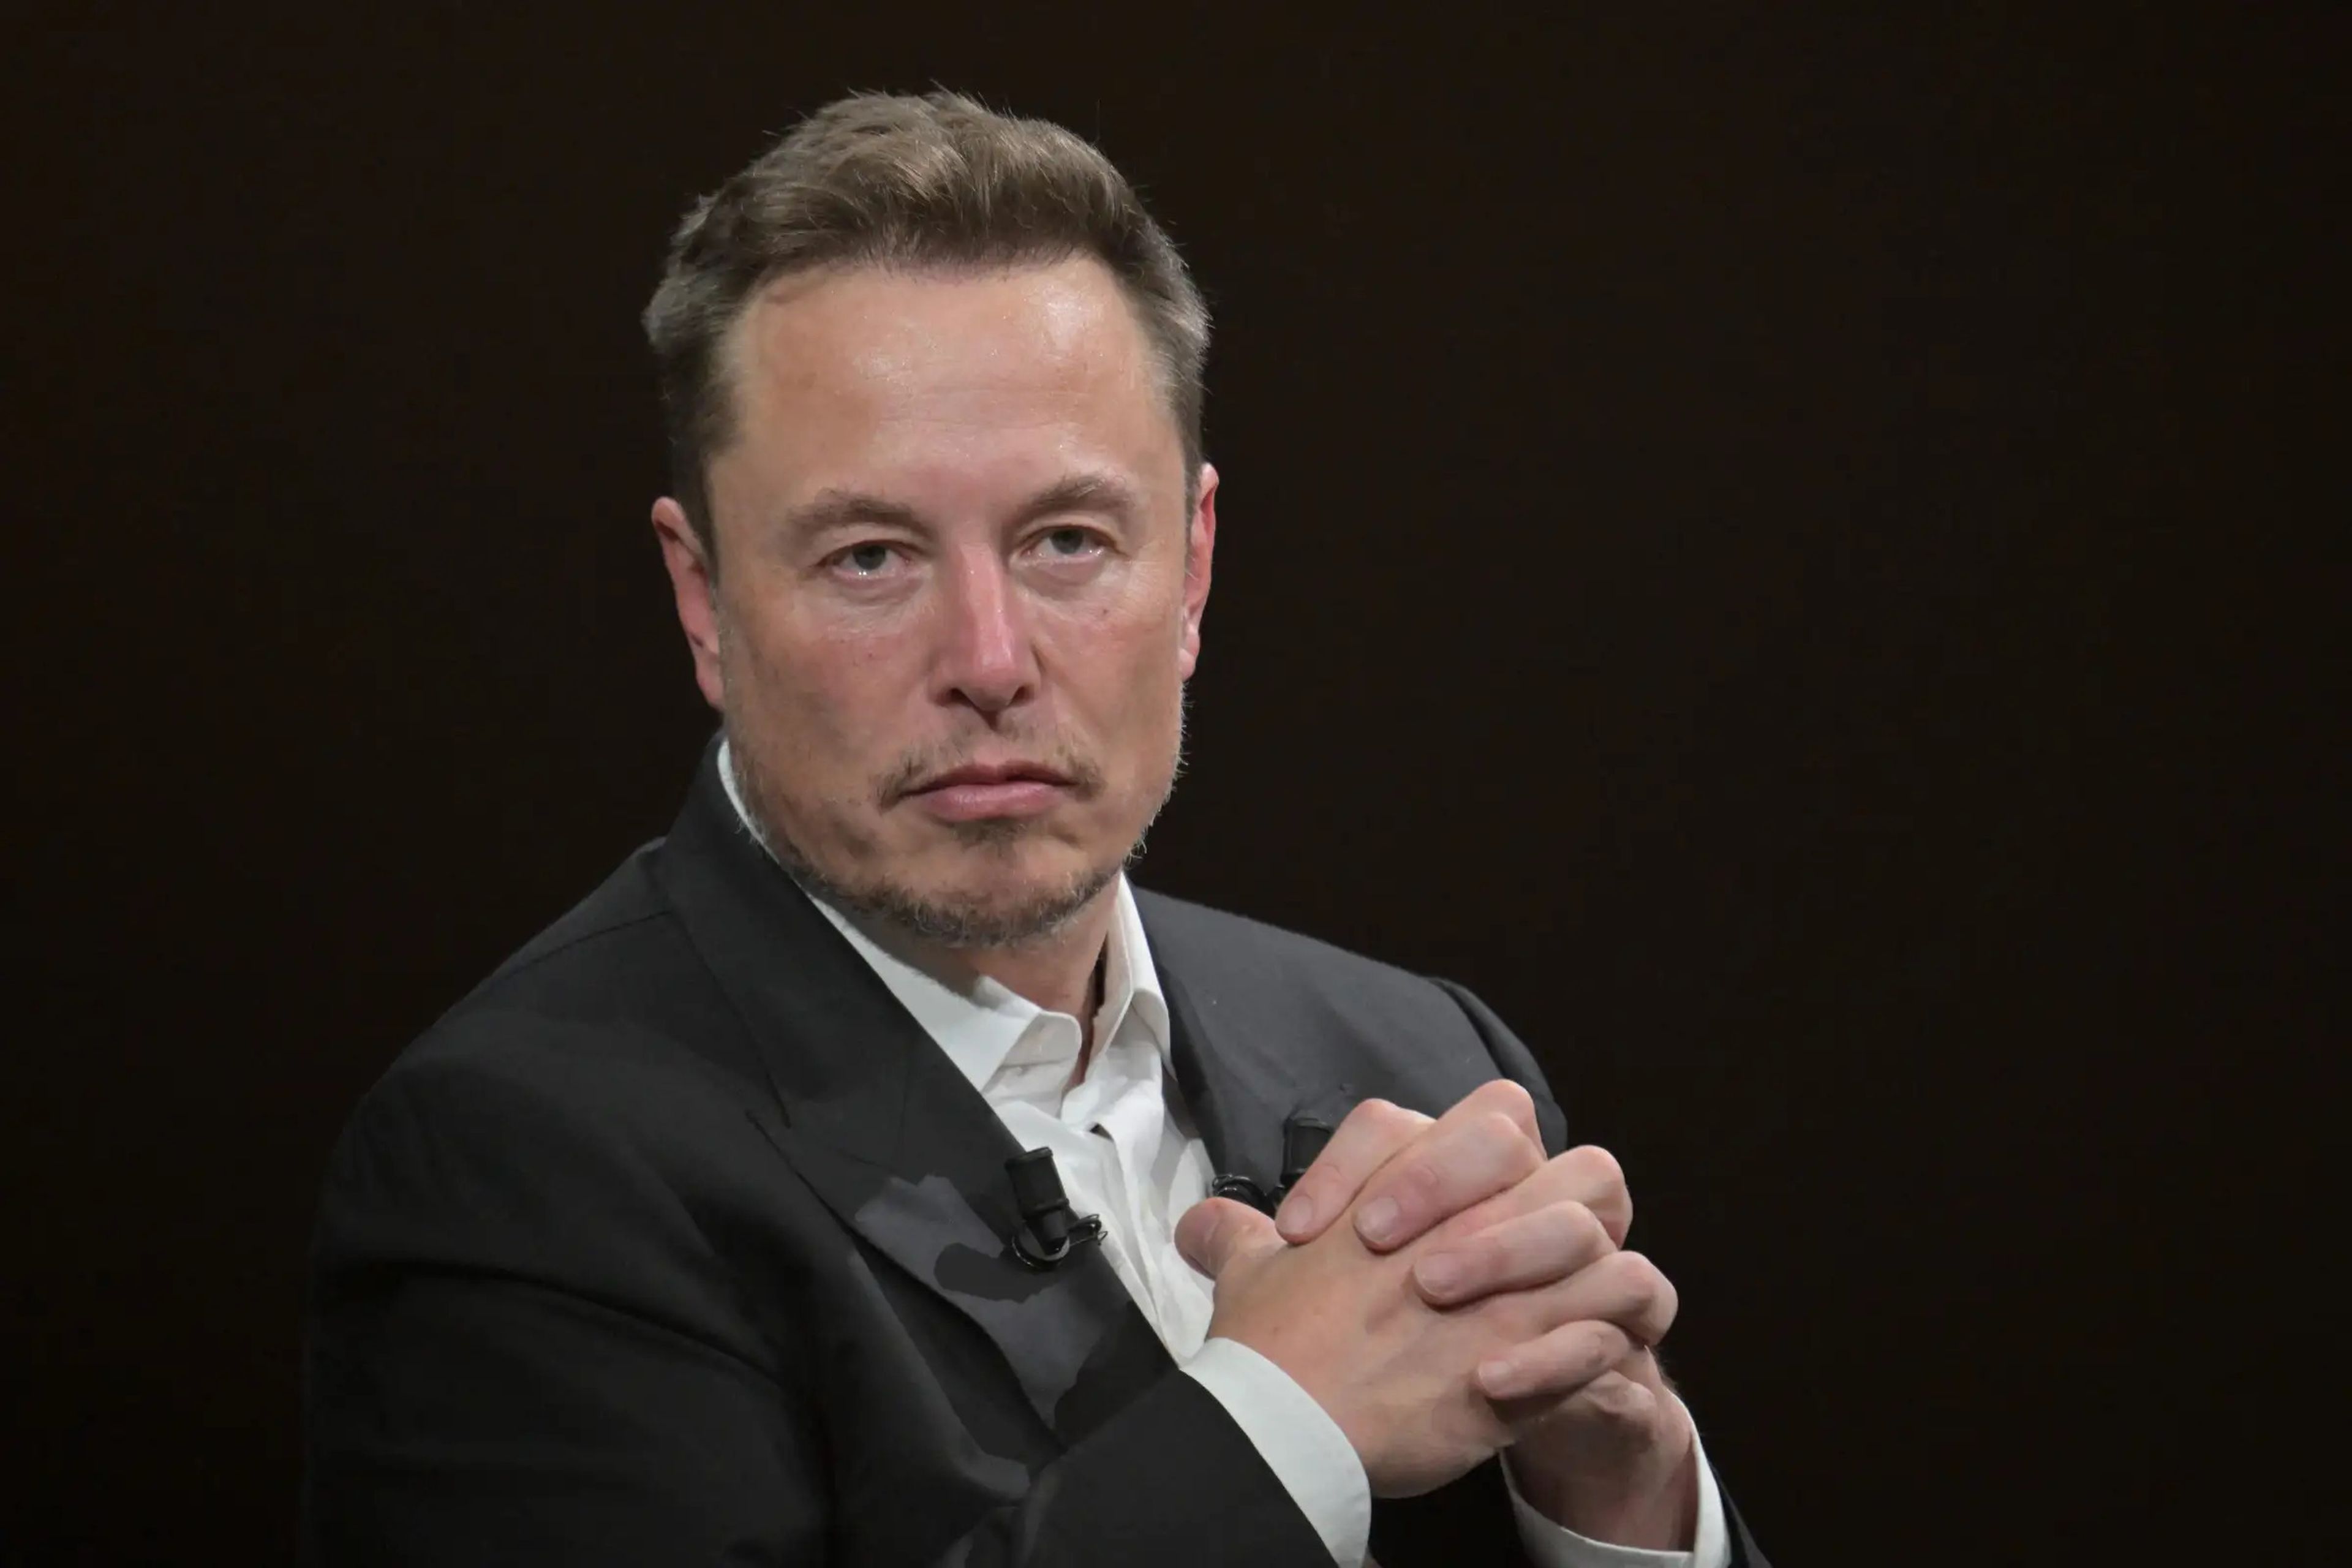 Elon Musk clasping his hands together with a serious expression on his face while wearing a black suit with a white button-down shirt.